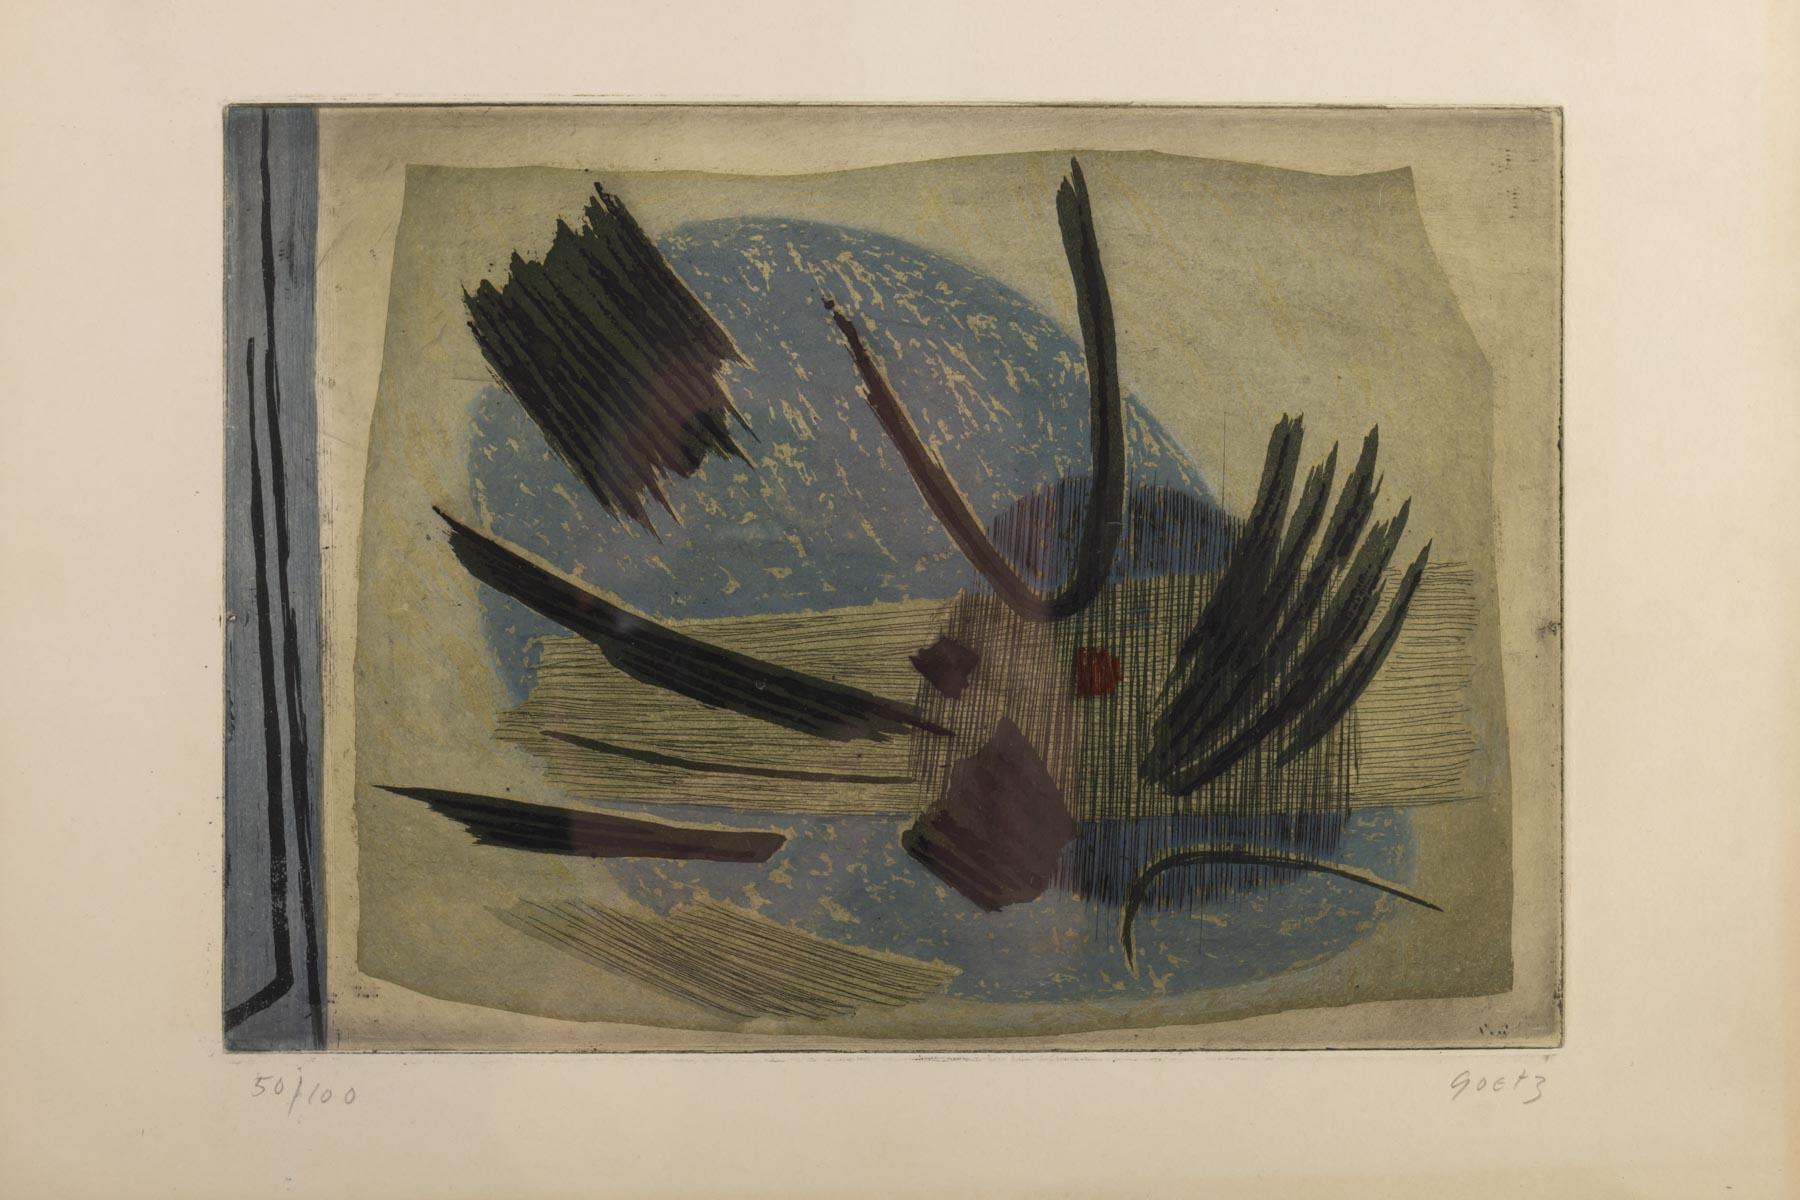 Pressed Lithography by Henri Goetz